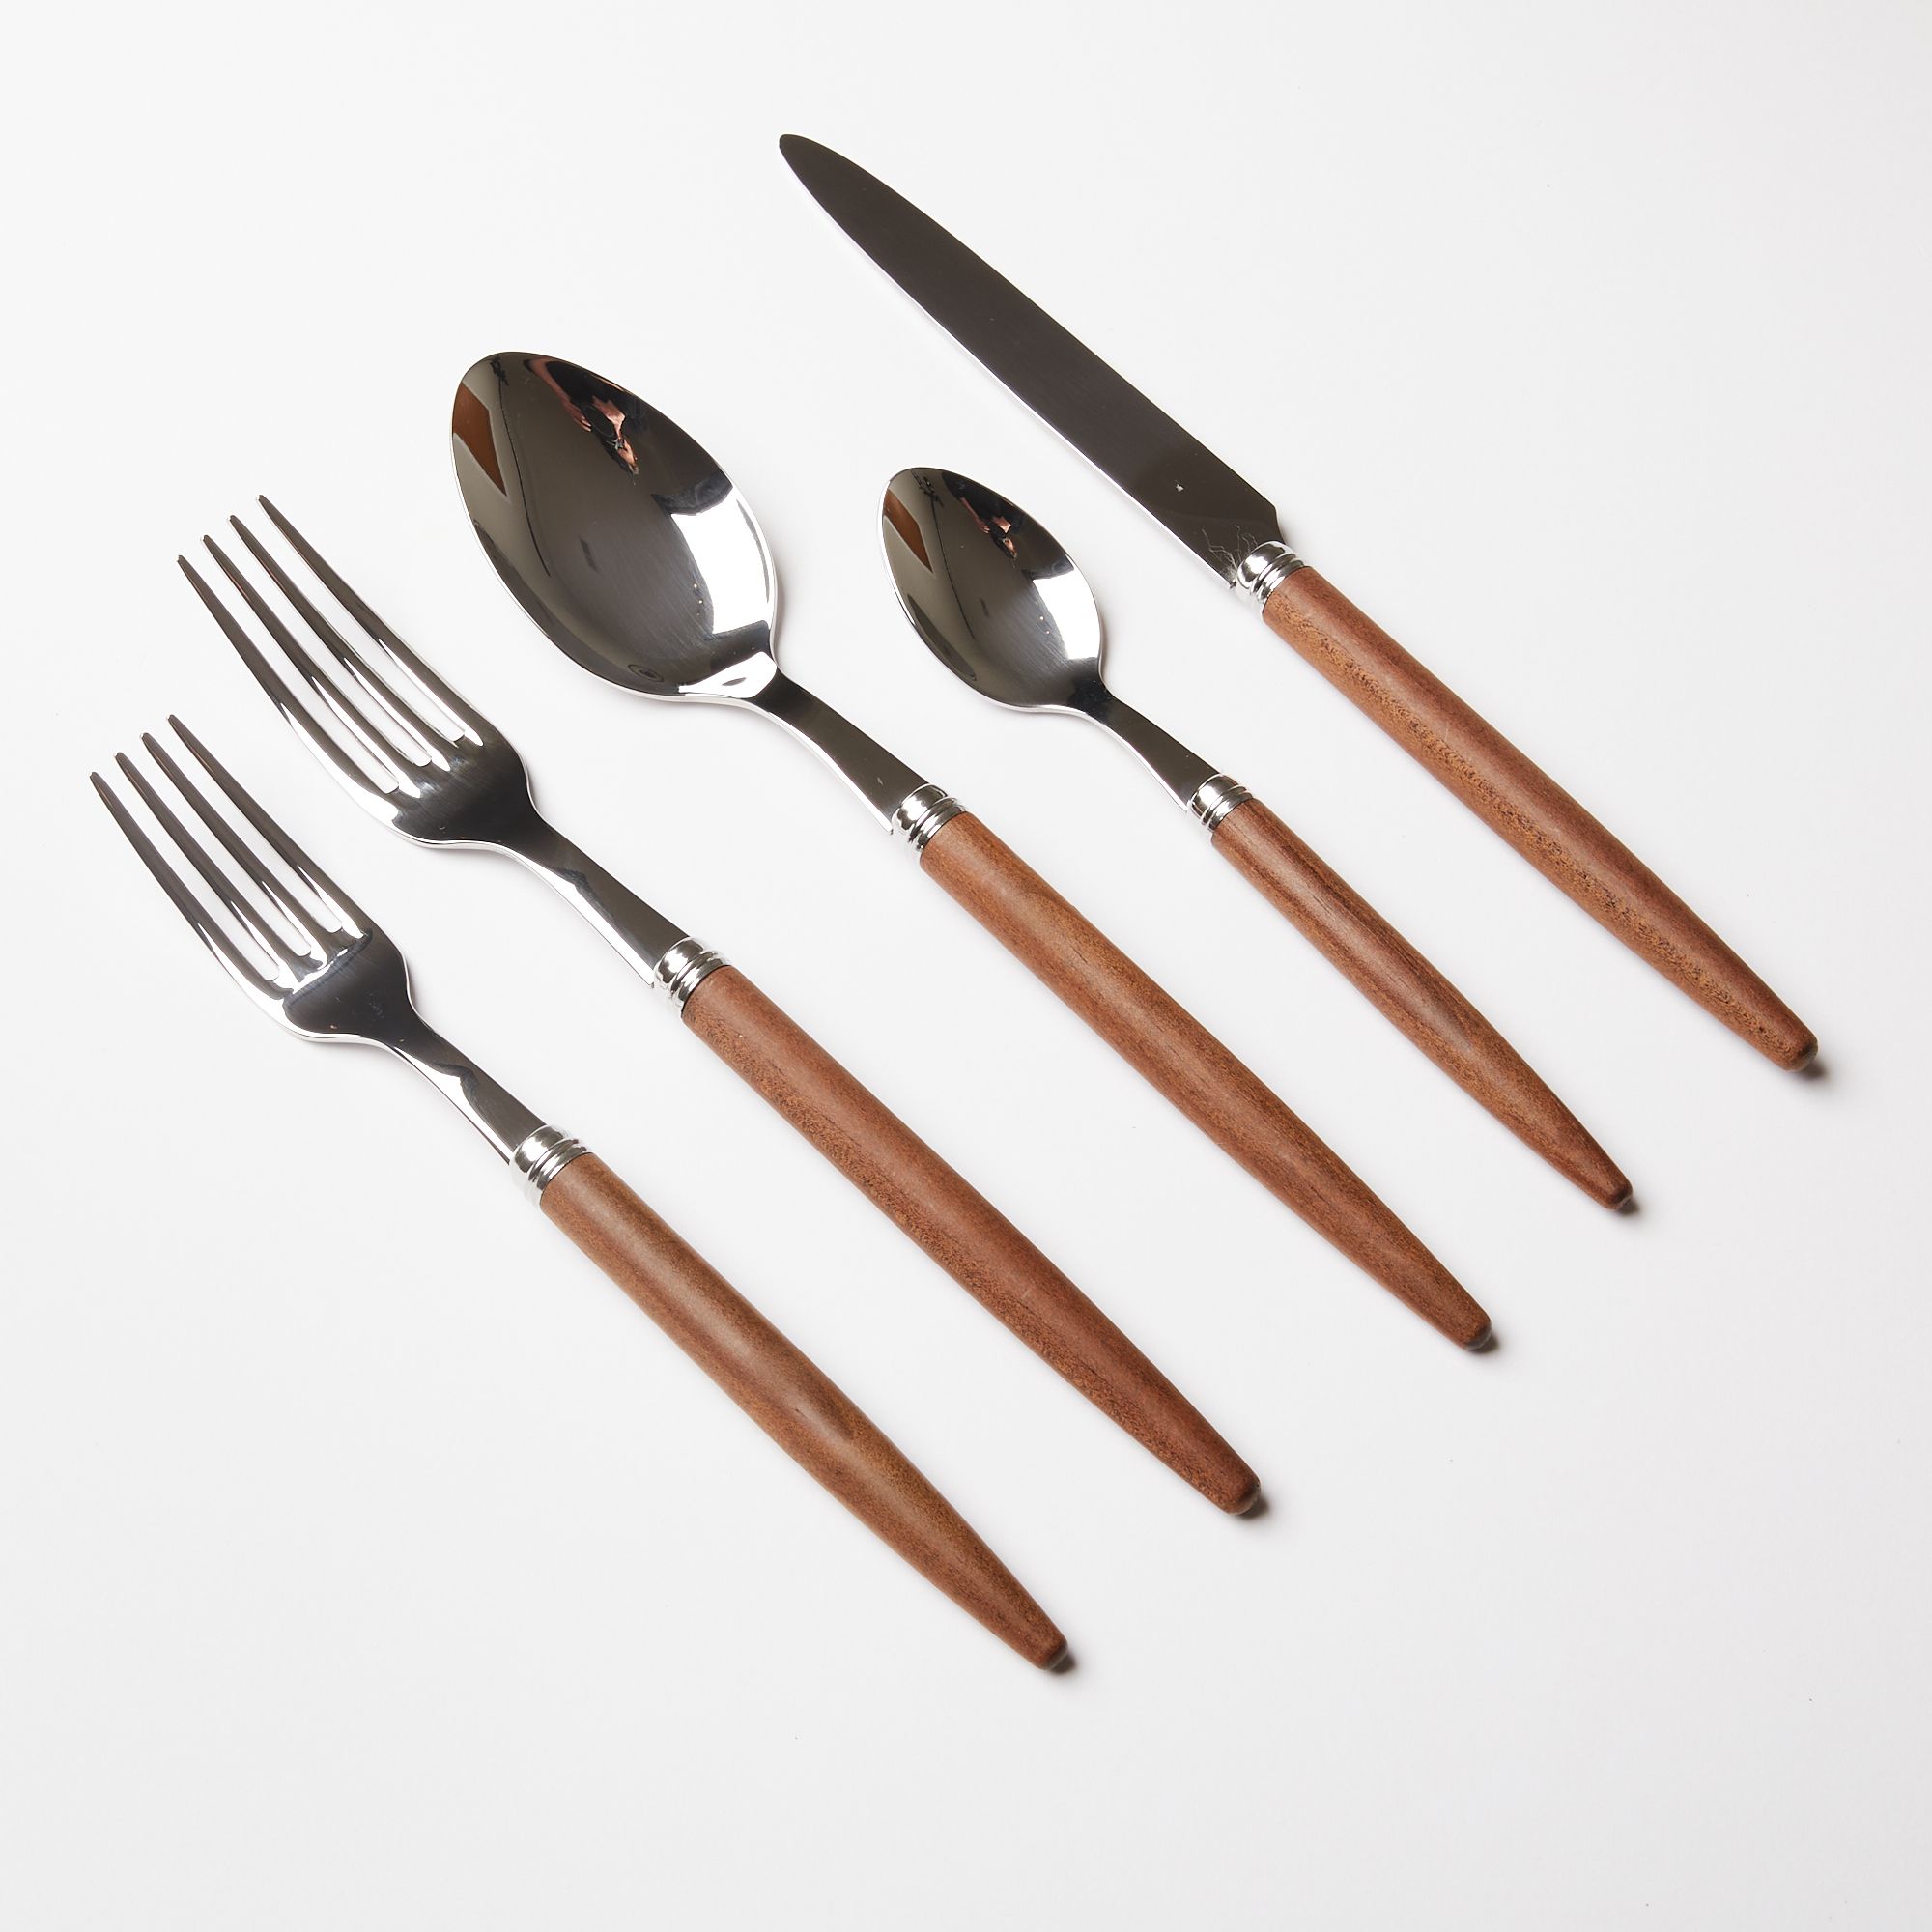 A flatware set of a salad fork, dinner fork, spoon, teaspoon, and knife - all with steel top and simple wood handles